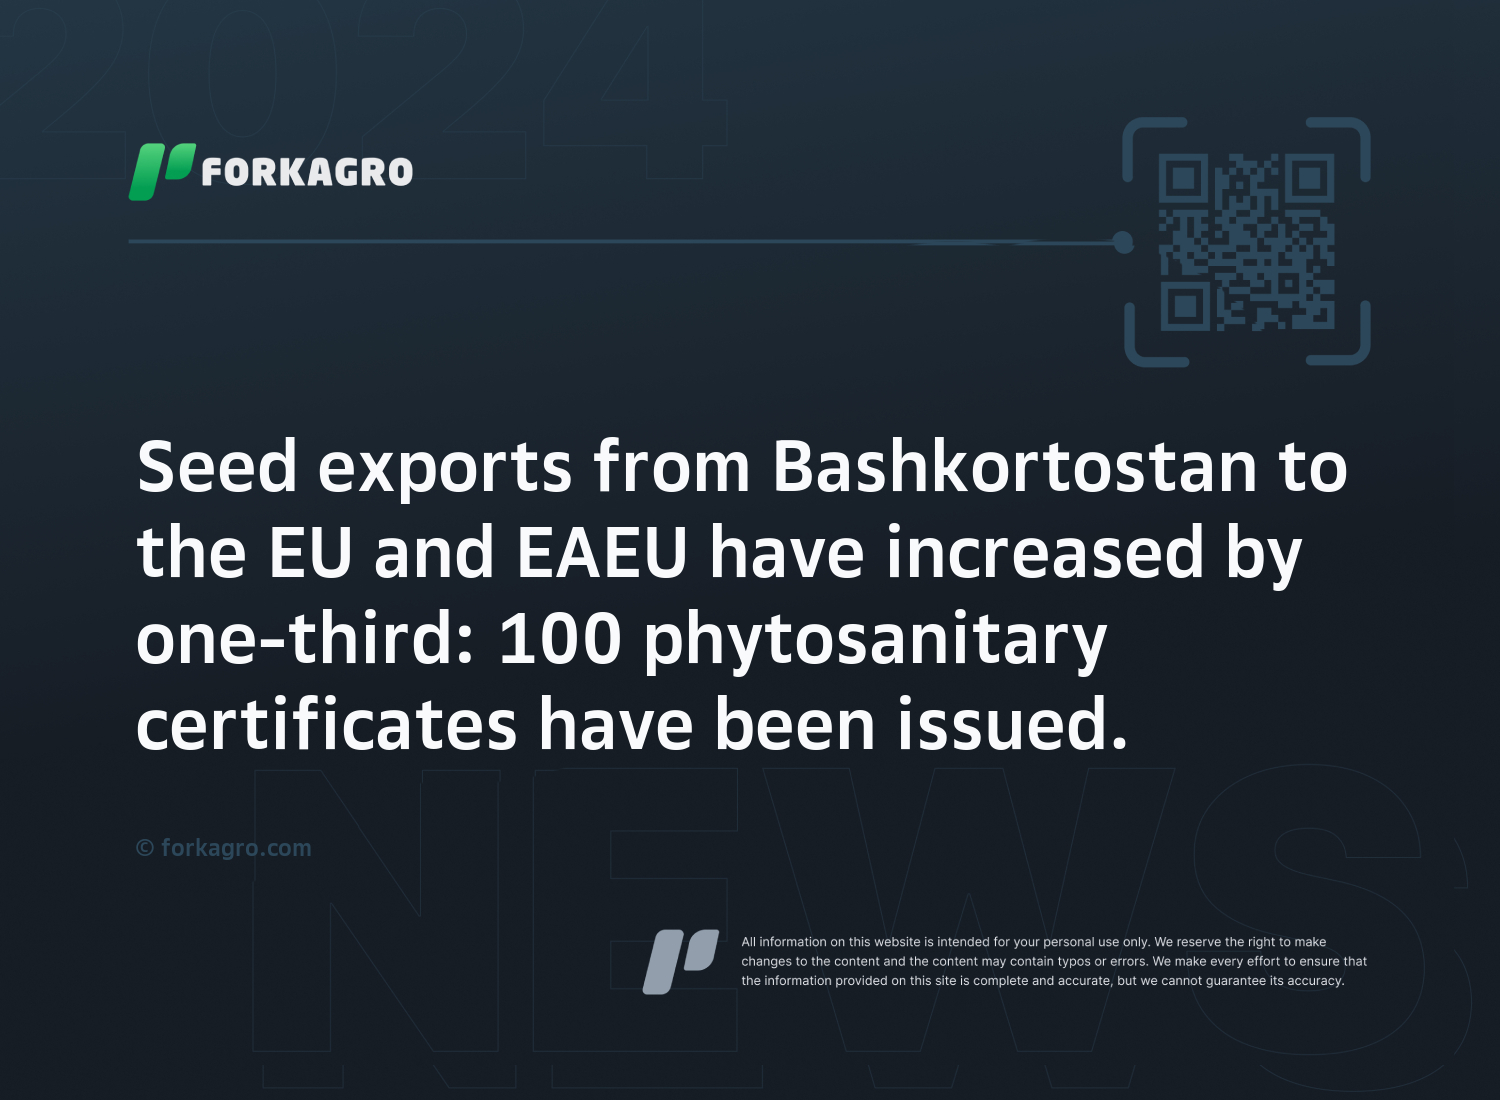 Seed exports from Bashkortostan to the EU and EAEU have increased by one-third: 100 phytosanitary certificates have been issued.